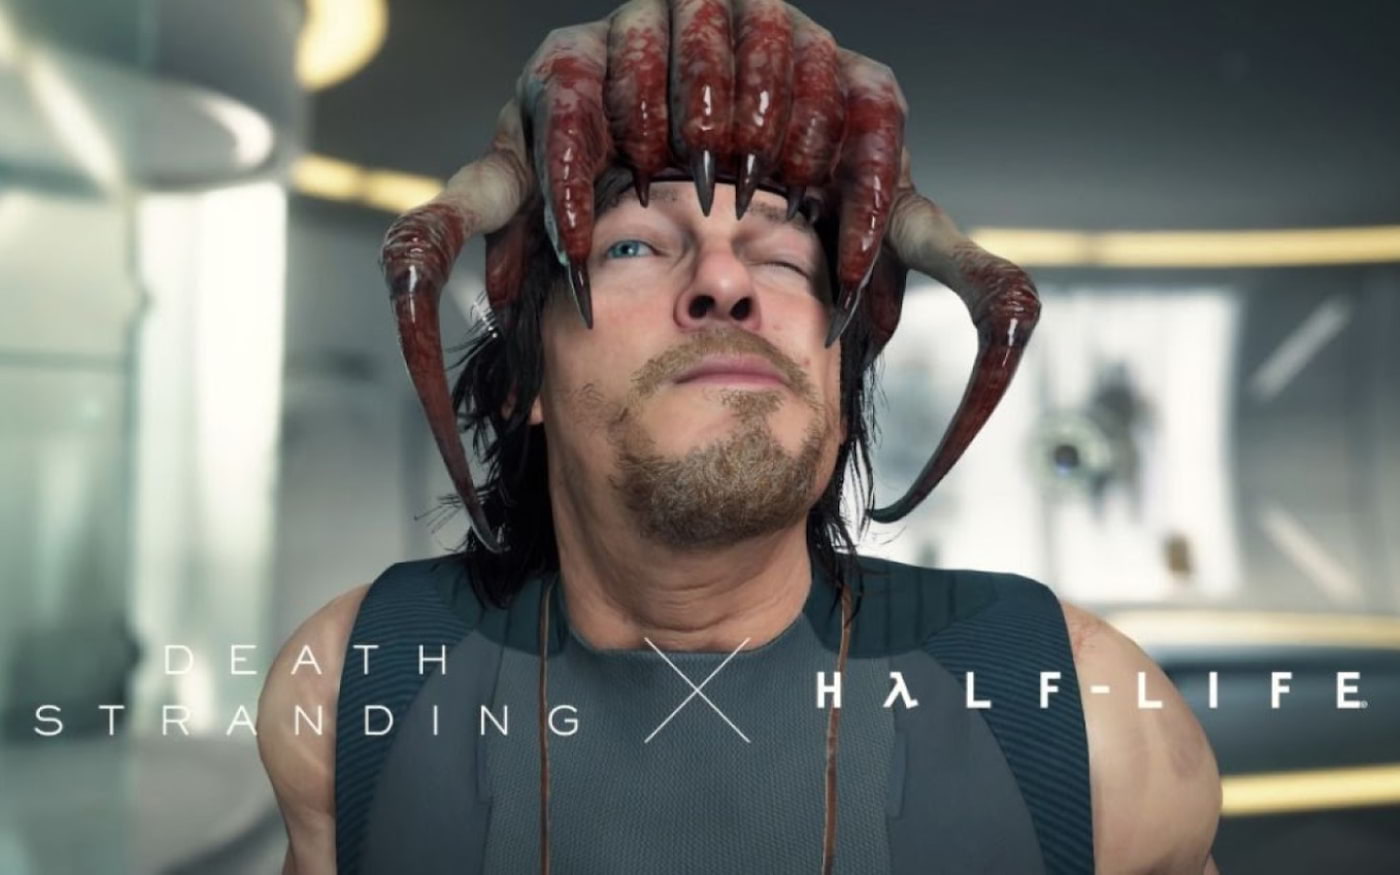 Death Stranding will be released for PC on June 2 with elements of Half-Life